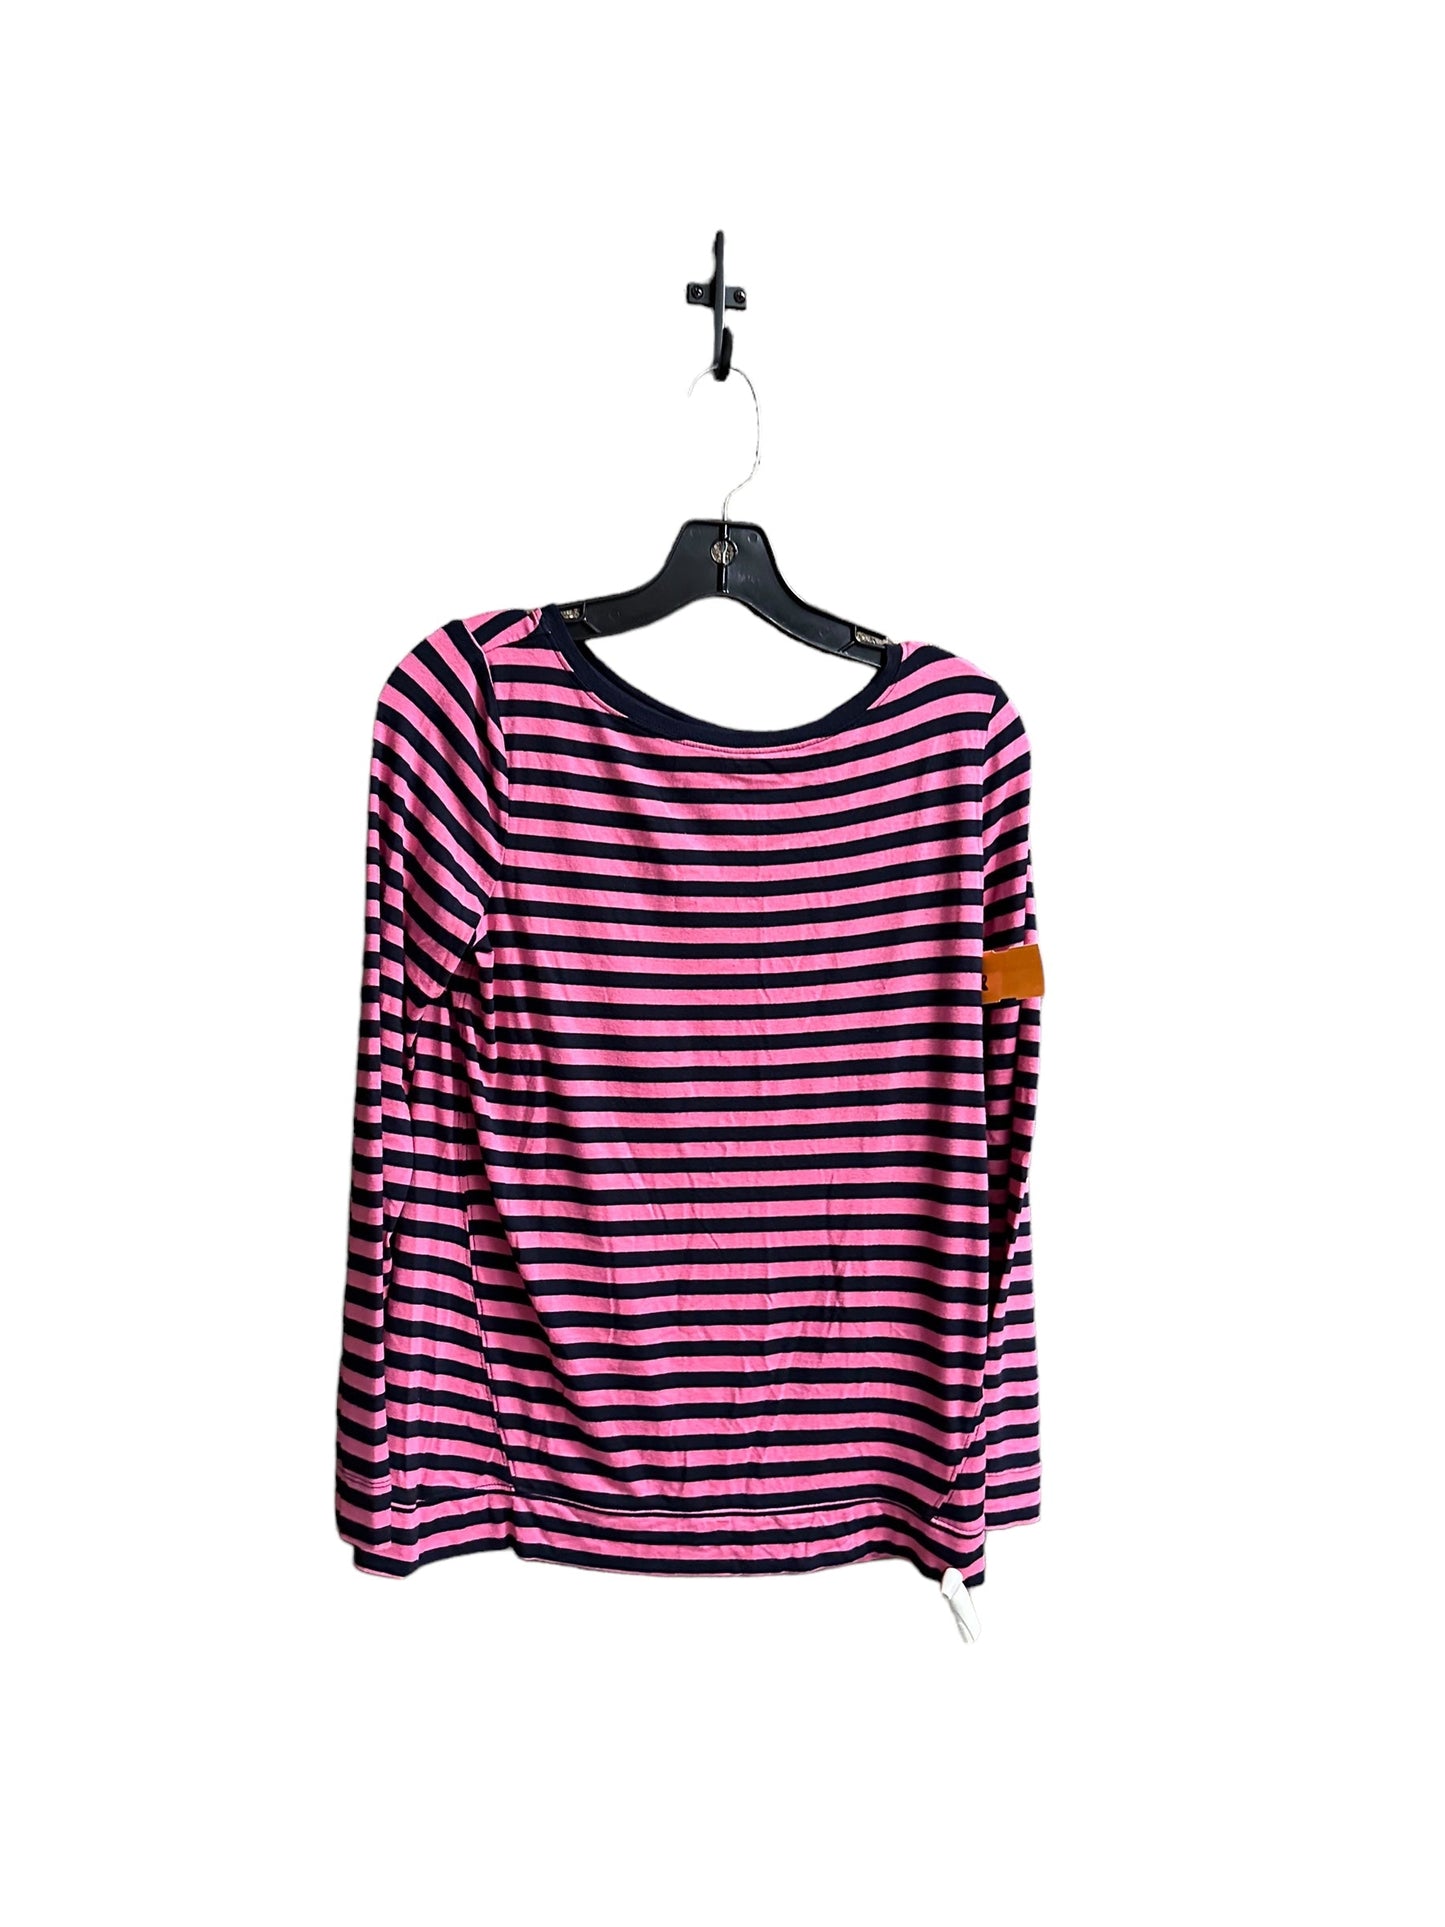 Striped Top Long Sleeve Talbots, Size S